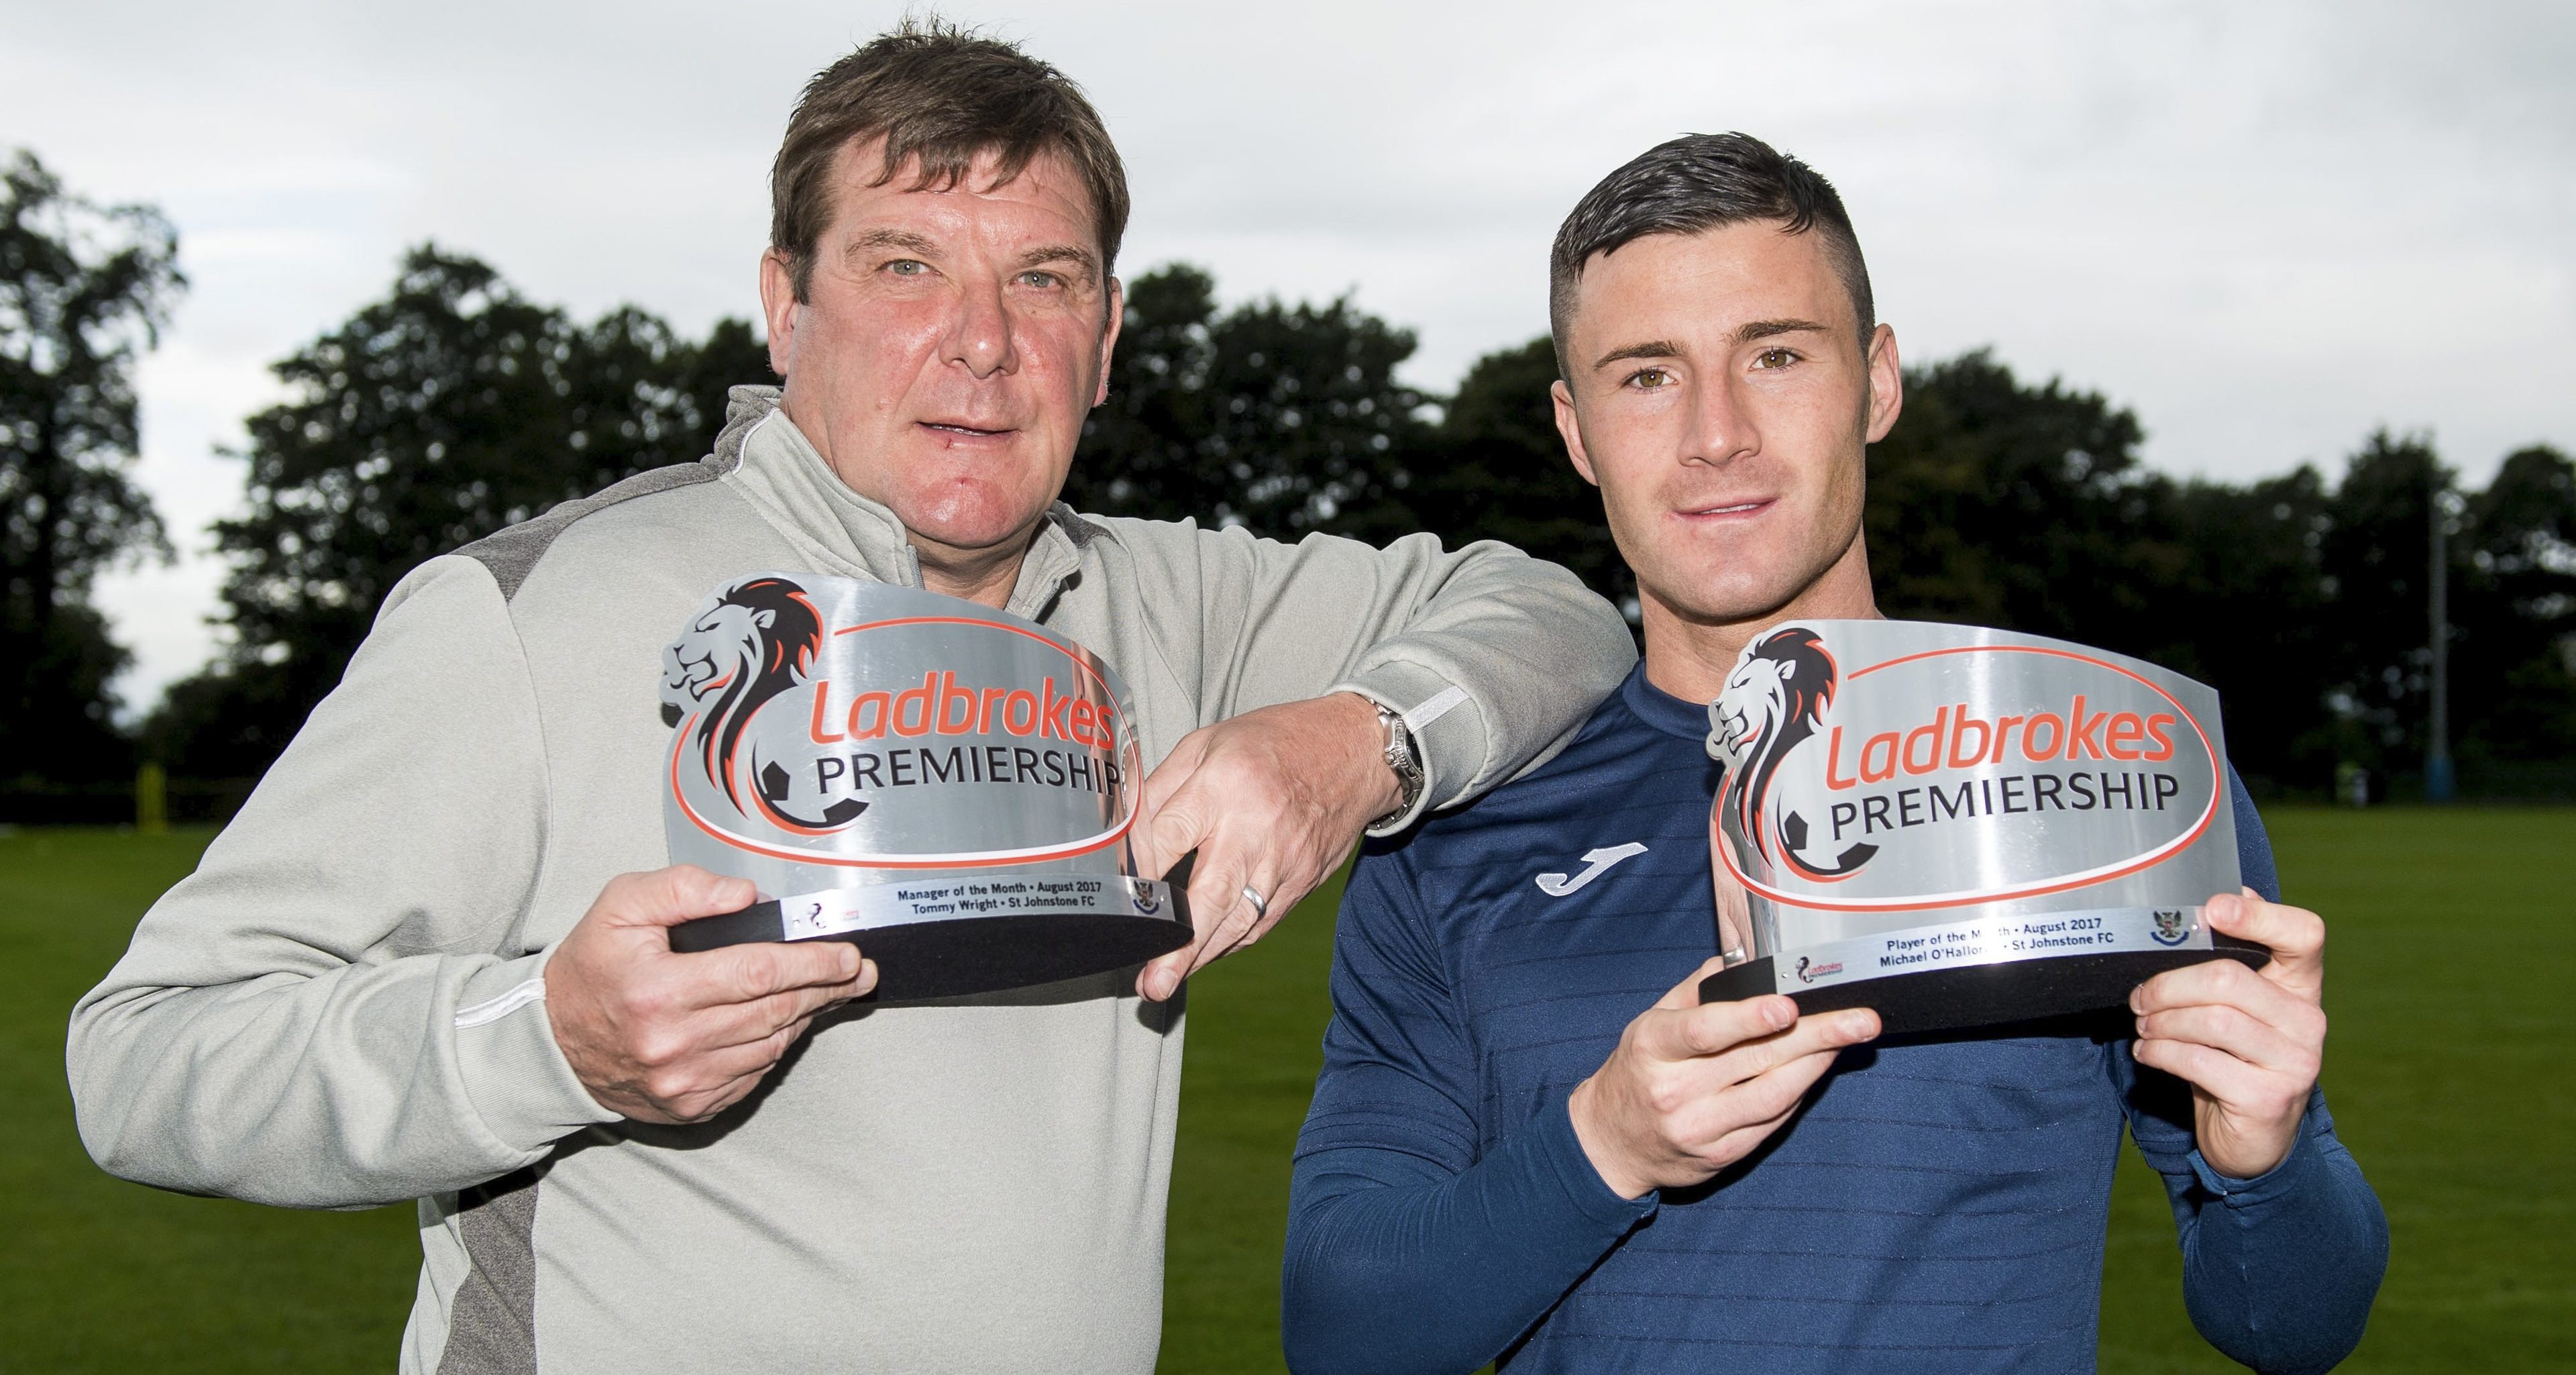 St Johnstone manager Tommy Wright (left) and striker Michael O'Halloran receive the Ladbrokes Premiership Manager and Player of the Month awards for August.